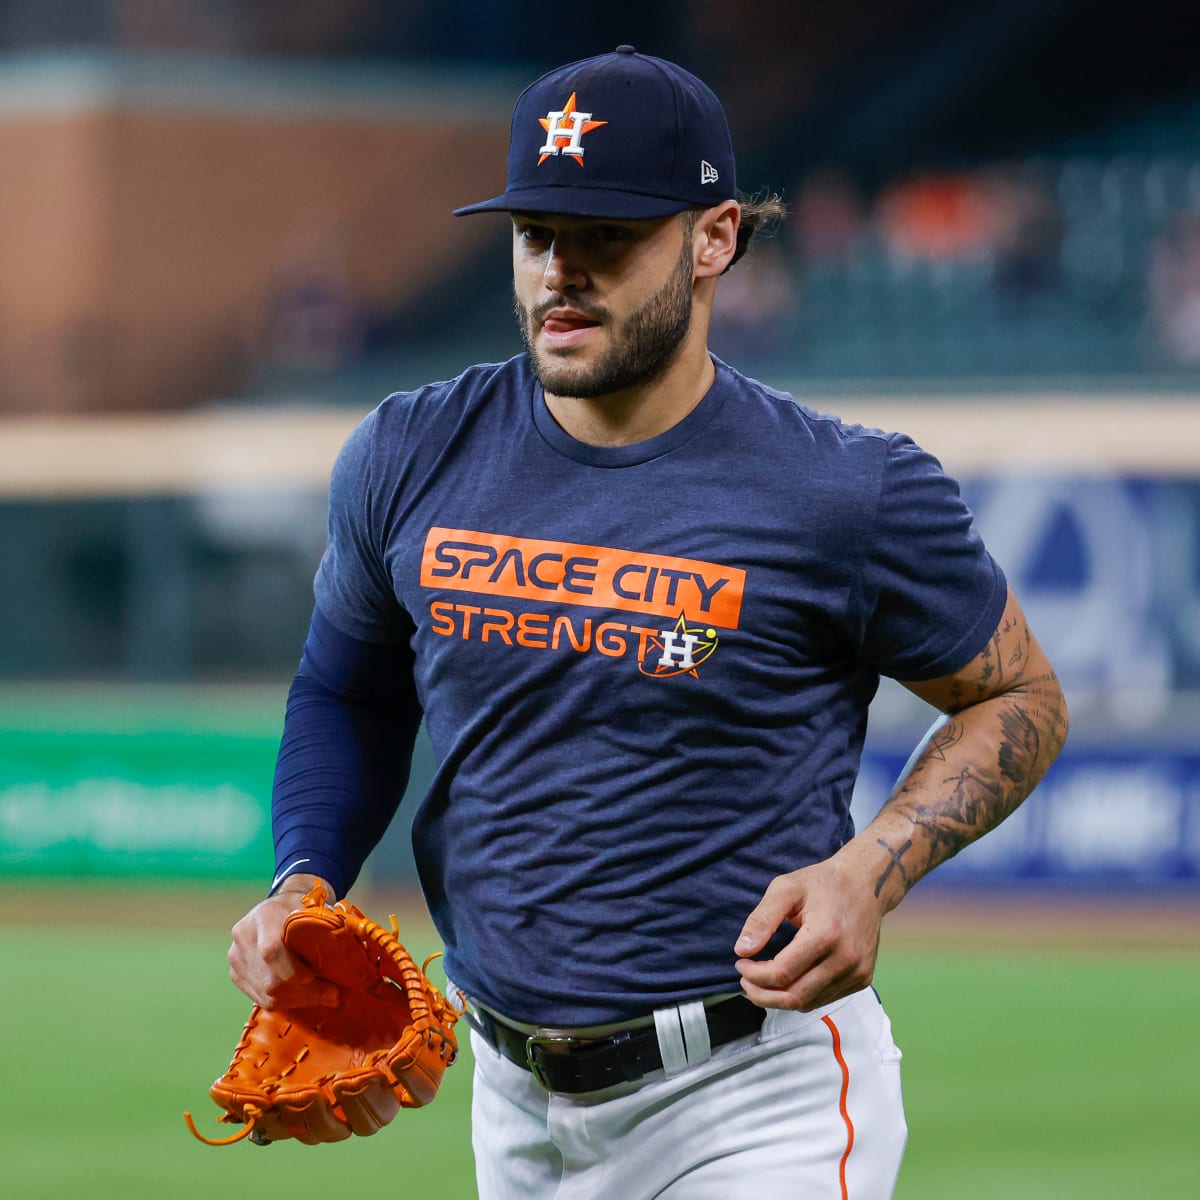 Astros pitcher, Tampa native Lance McCullers Jr. inks left arm into an ode  to Houston